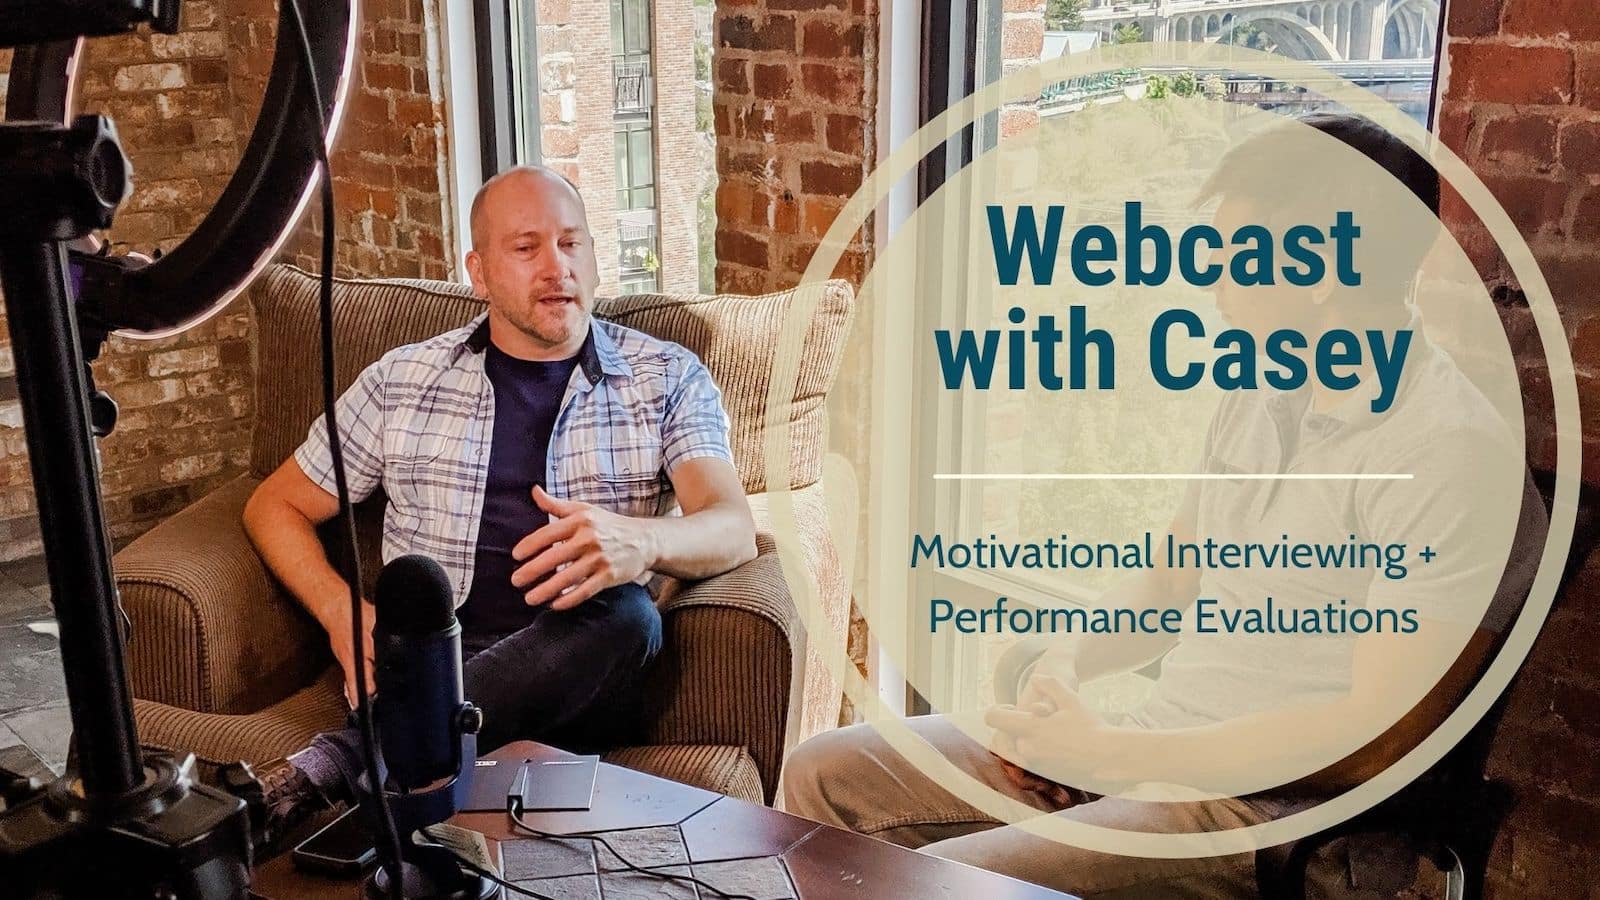 Feb 2020 Webcast with Casey